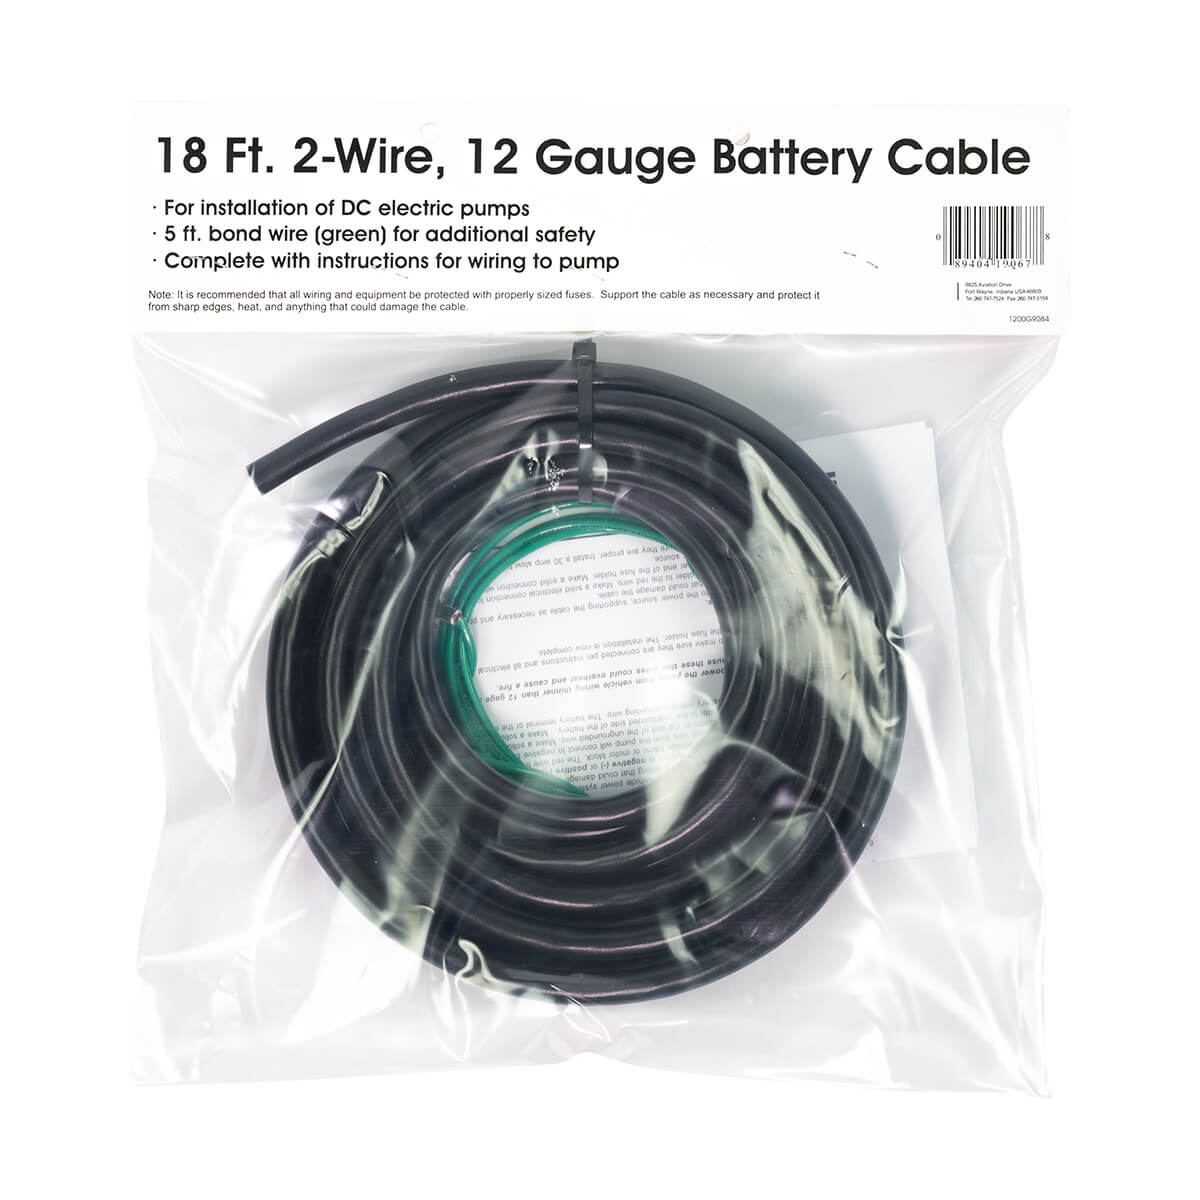 12 Gauge Battery Cable - 18-ft